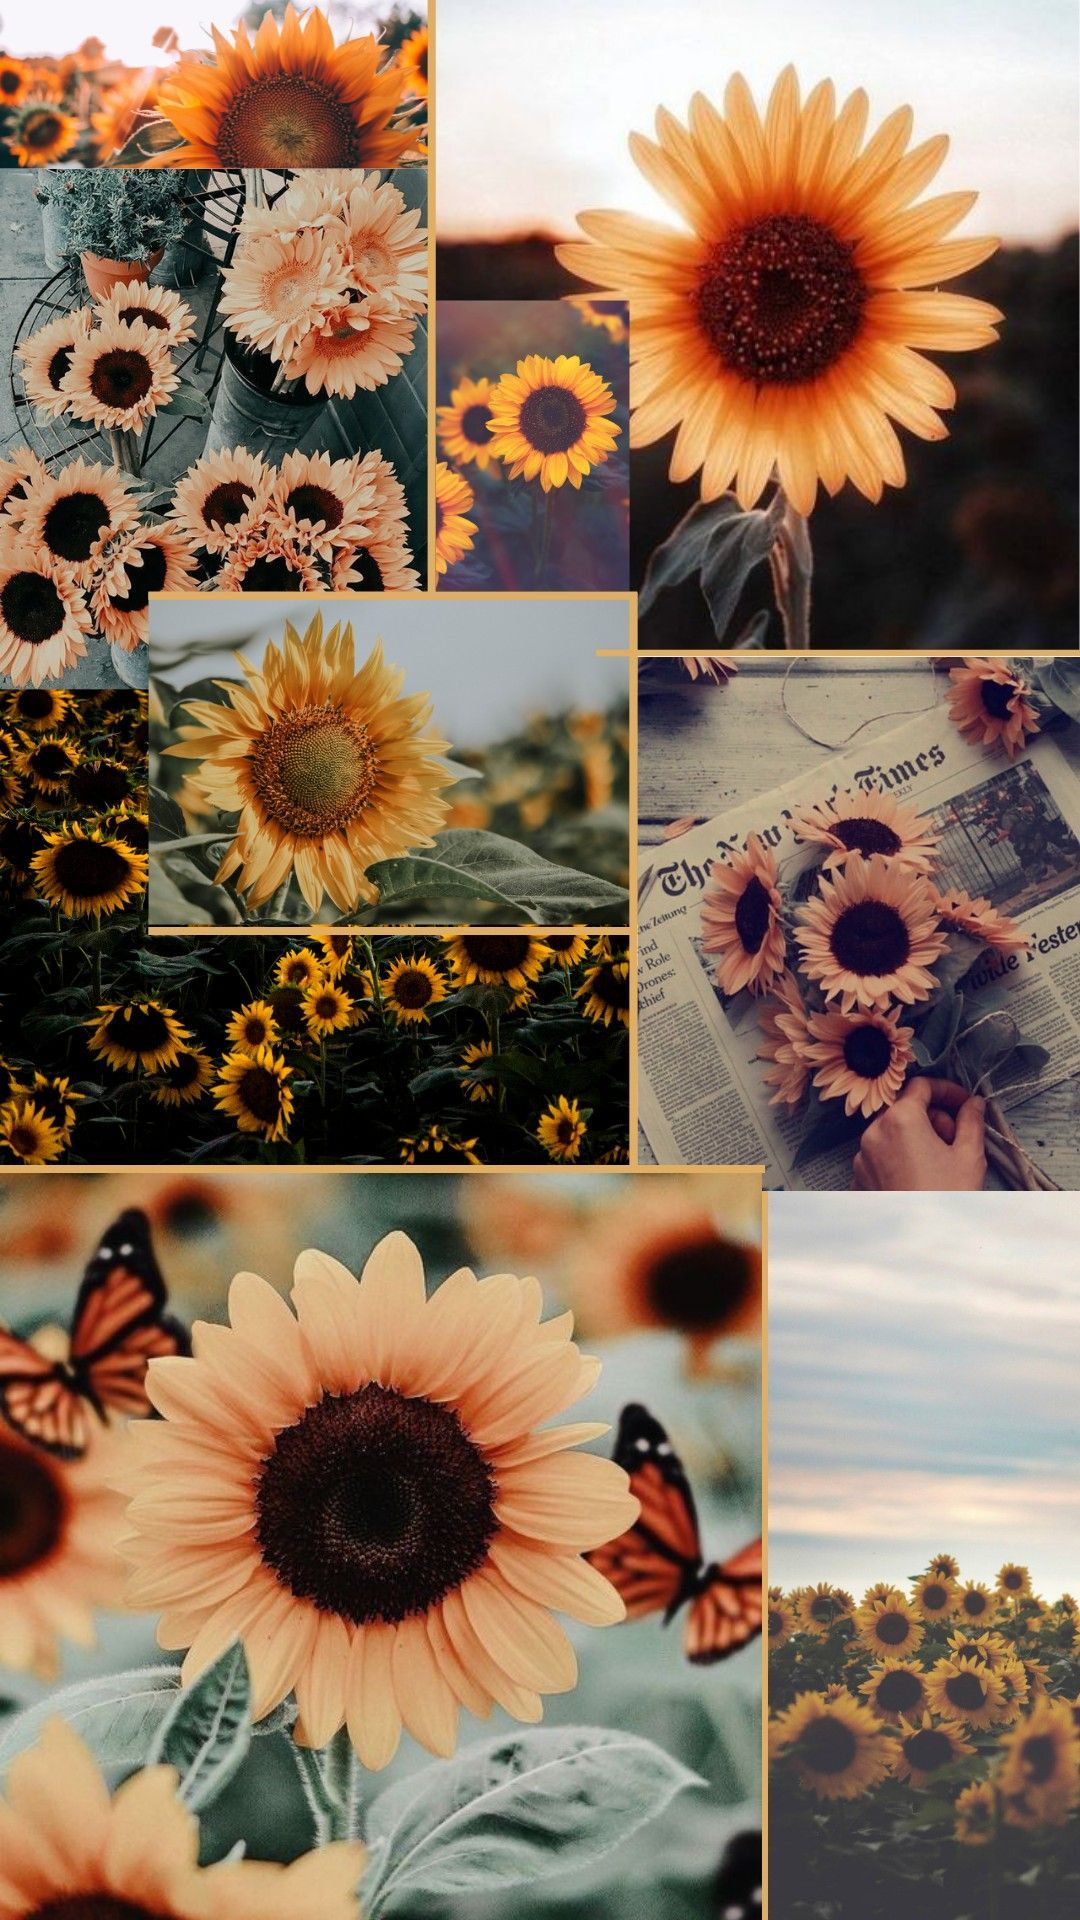 Aesthetic wallpaper of sunflowers, butterflies, and vintage newspaper - Sunflower